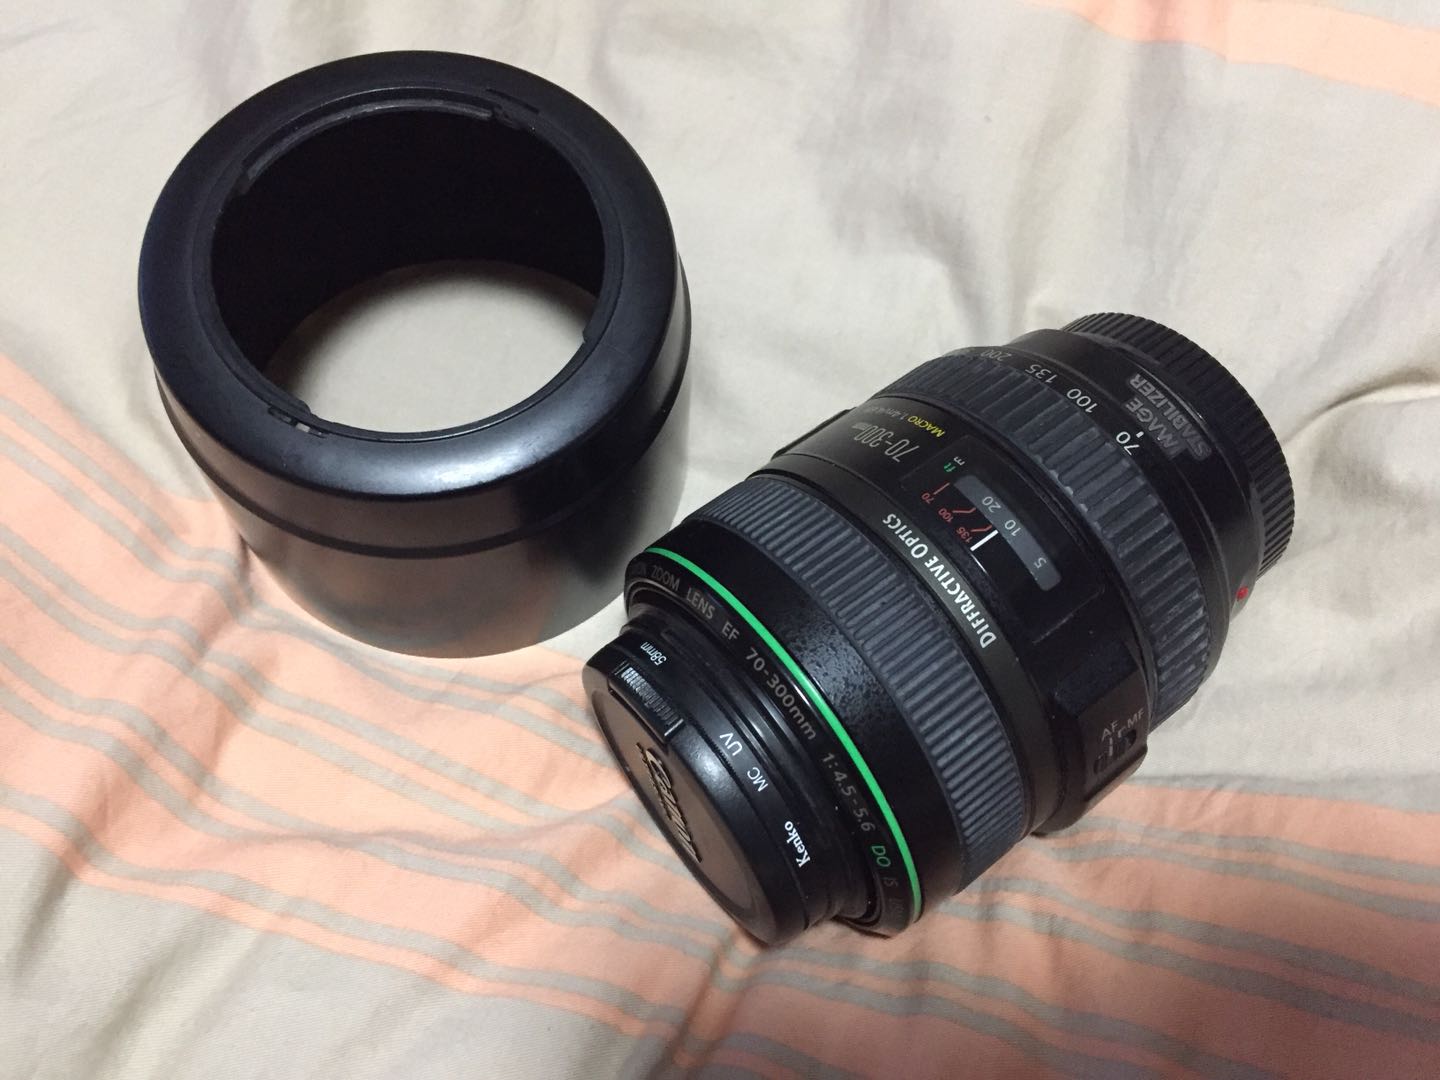  Canon EF 70-300mm f/4.5-5.6 DO IS USM (small green)